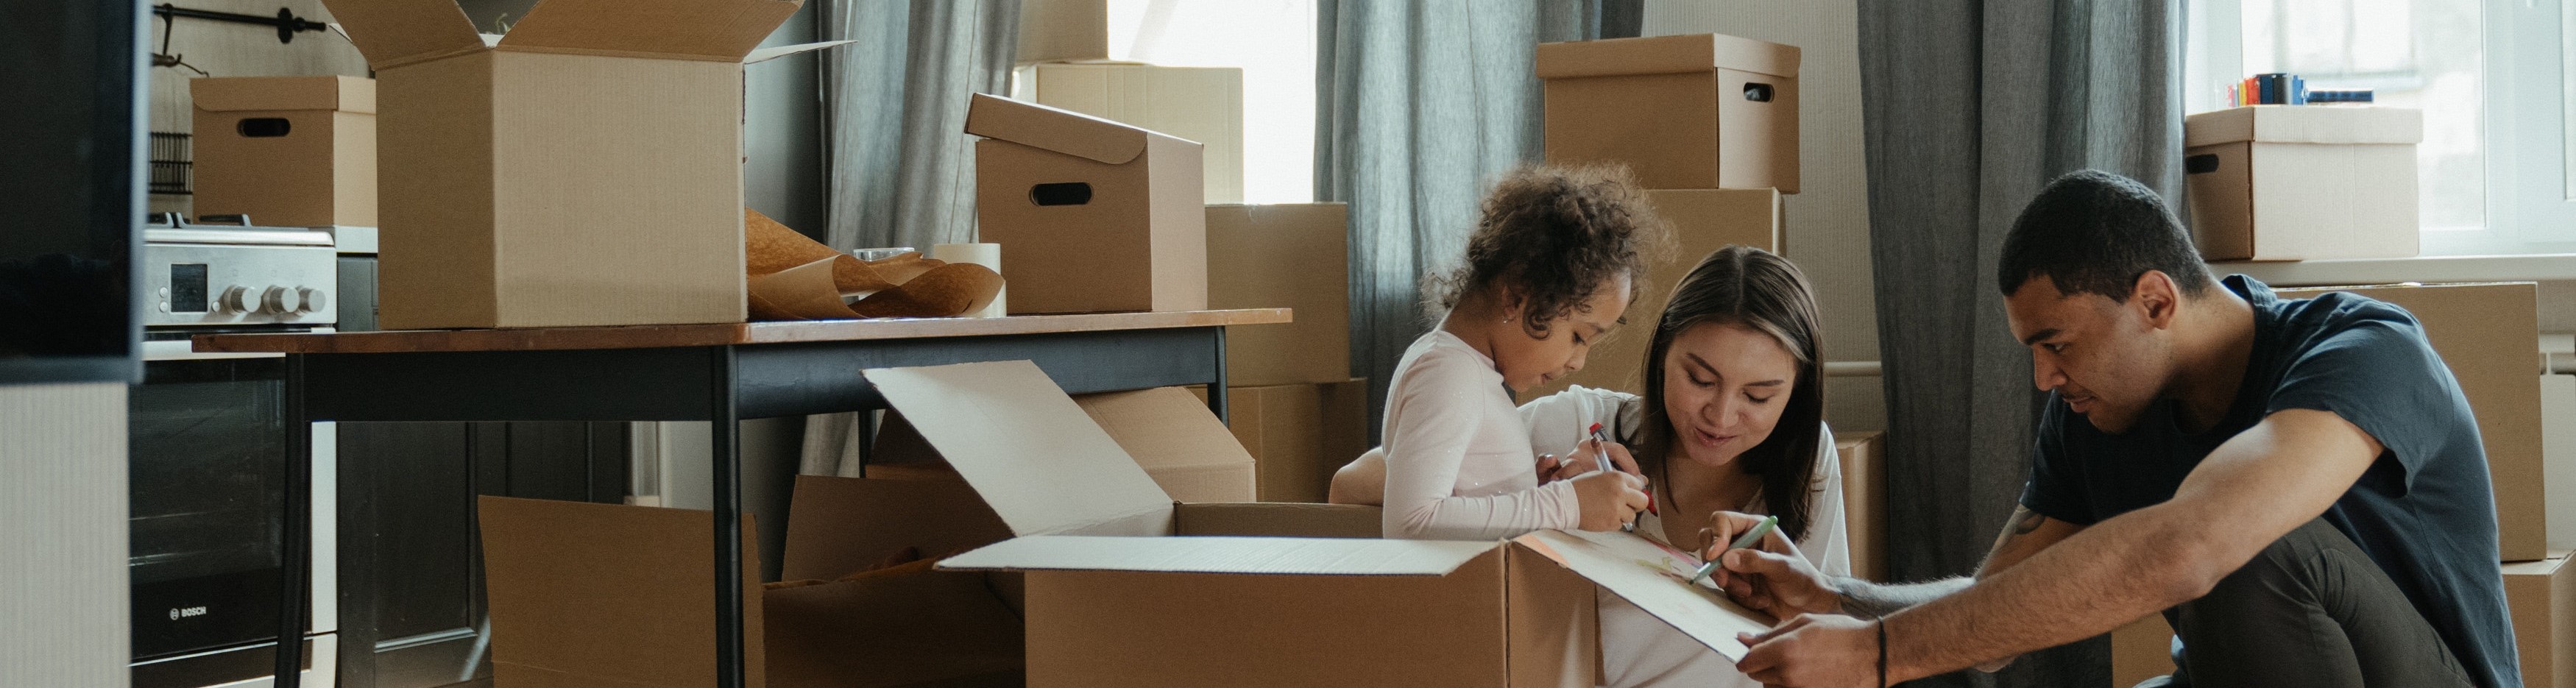 Image of a family packing boxes to move.